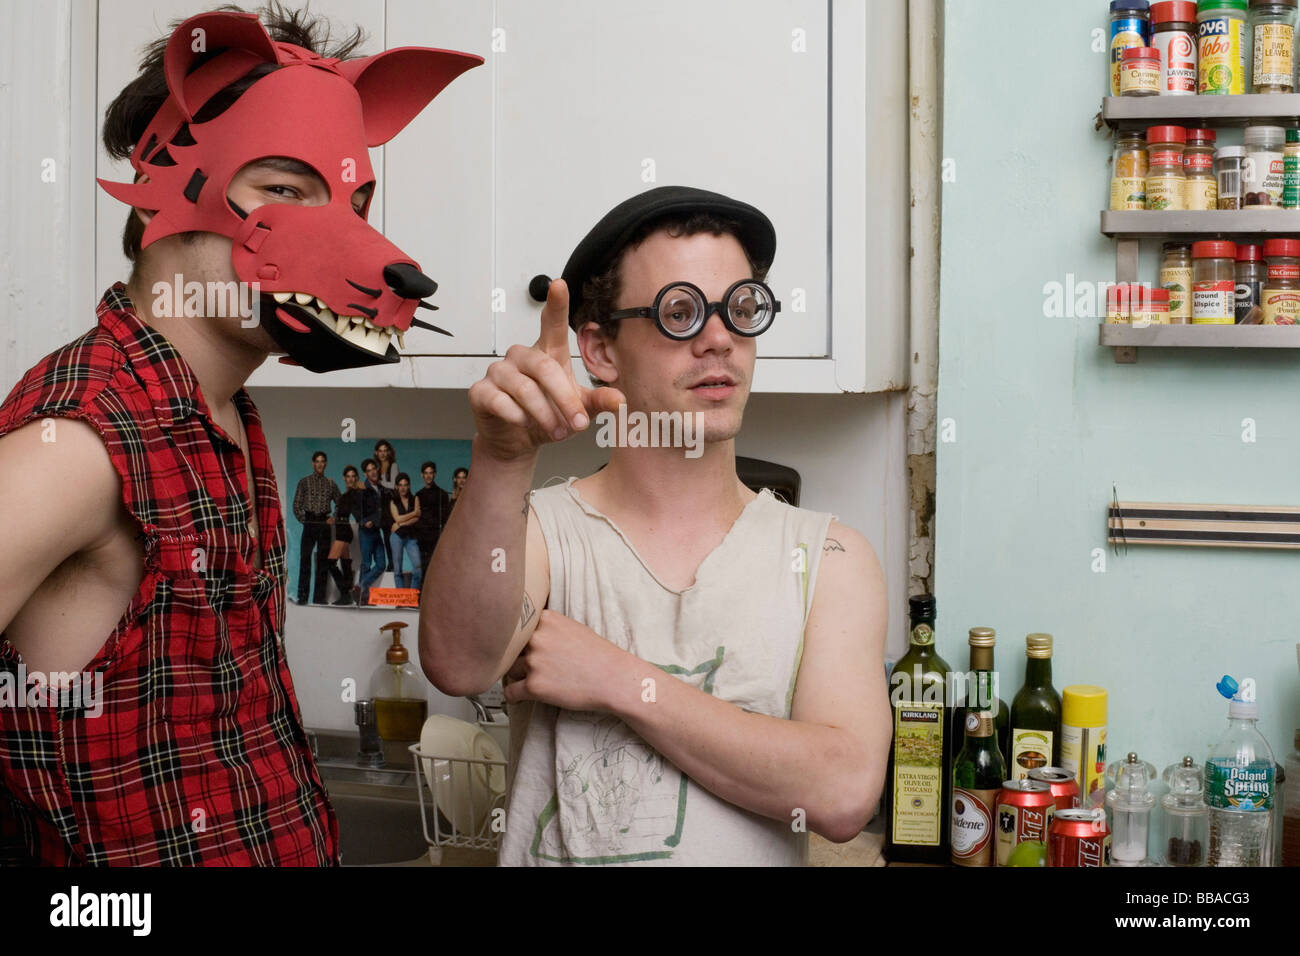 Two young men standing in a kitchen wearing silly disguises Stock Photo